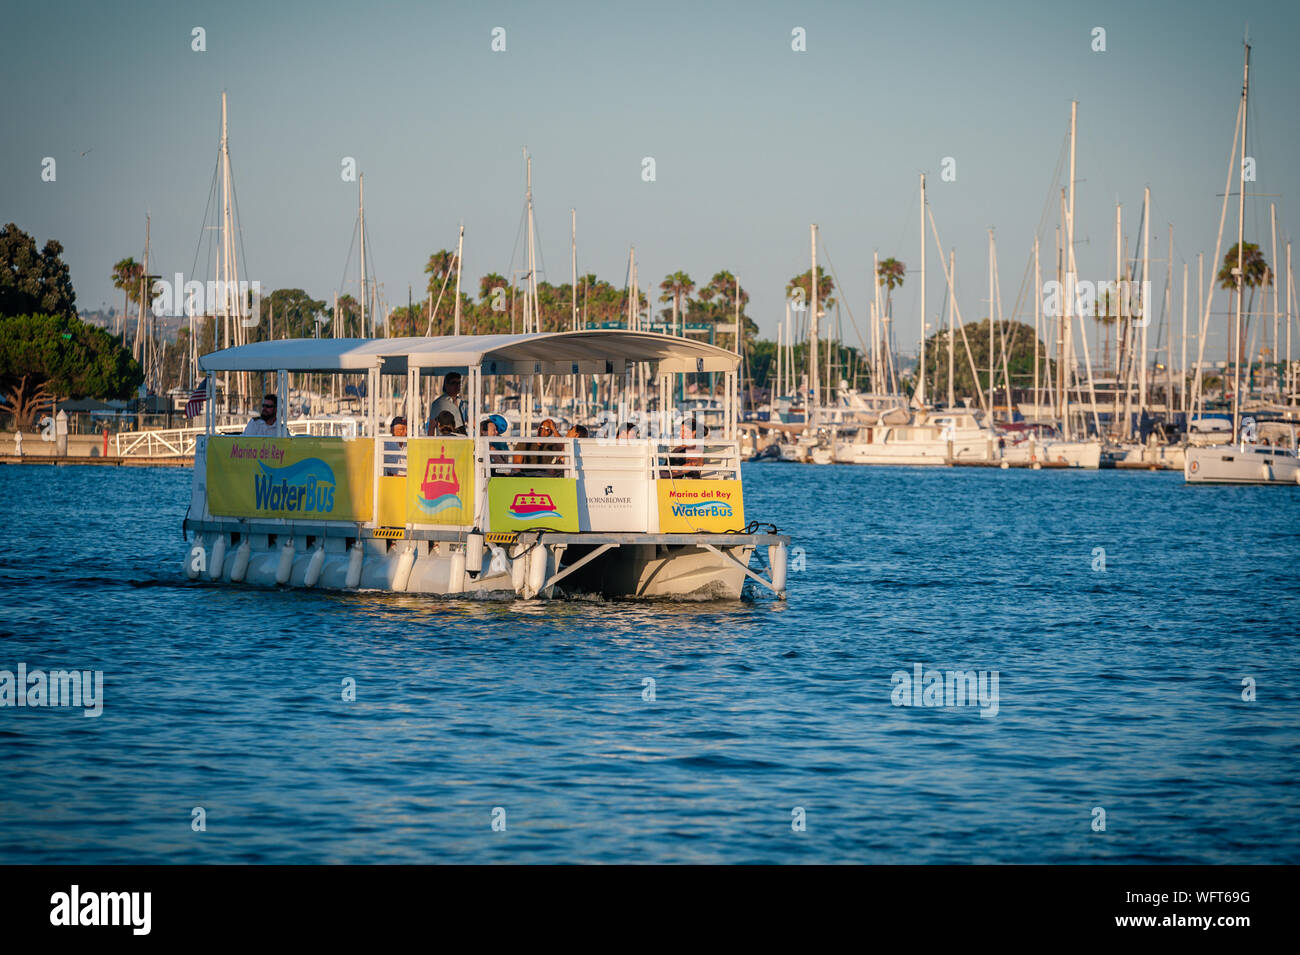 WaterBus tour ride during summer time in Marina Del Rey harbor in Los Angeles, CA. Stock Photo